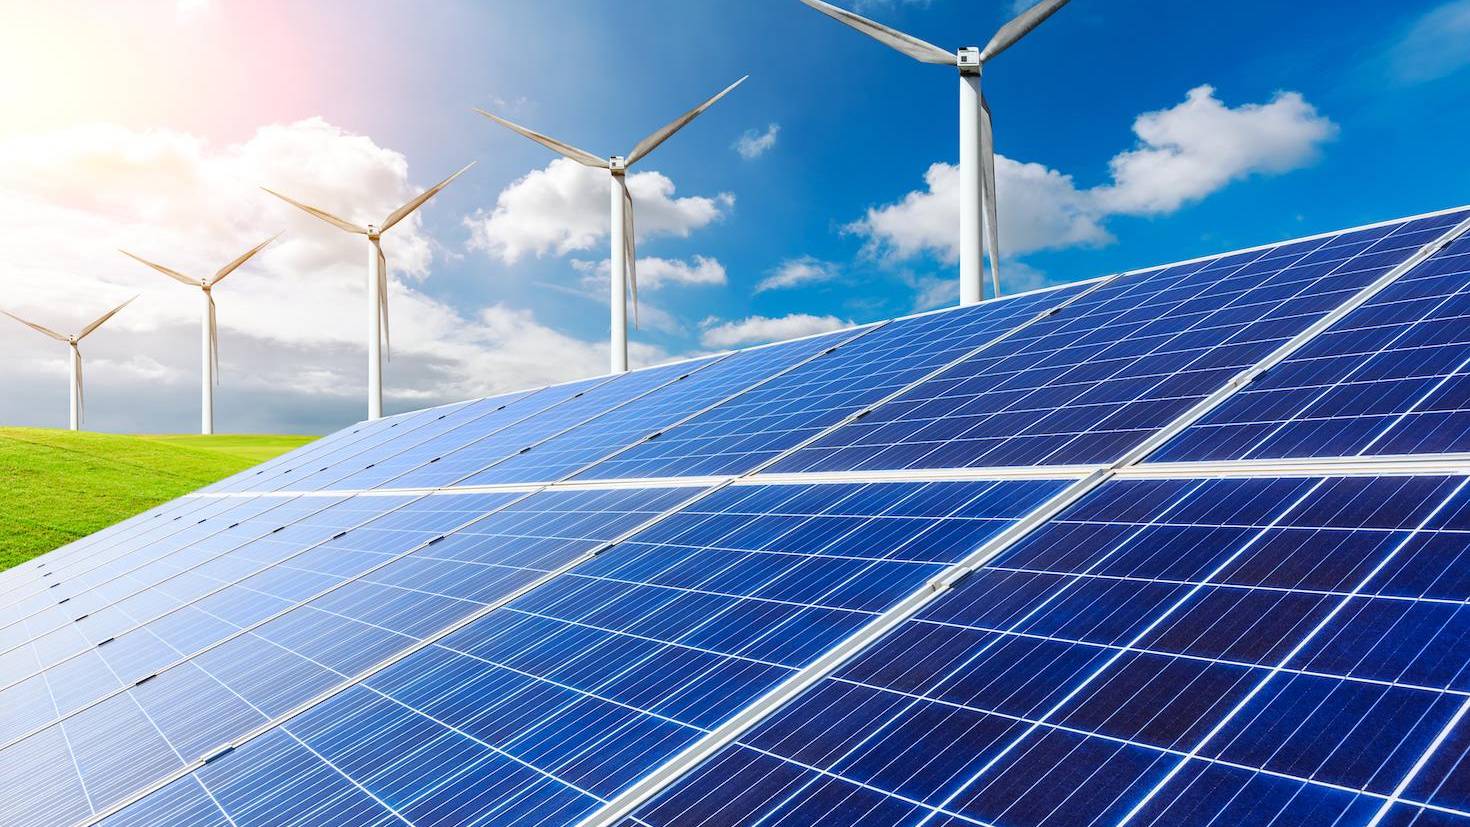 IEA: Global clean energy investment 'significantly' outpacing fossil fuel spending